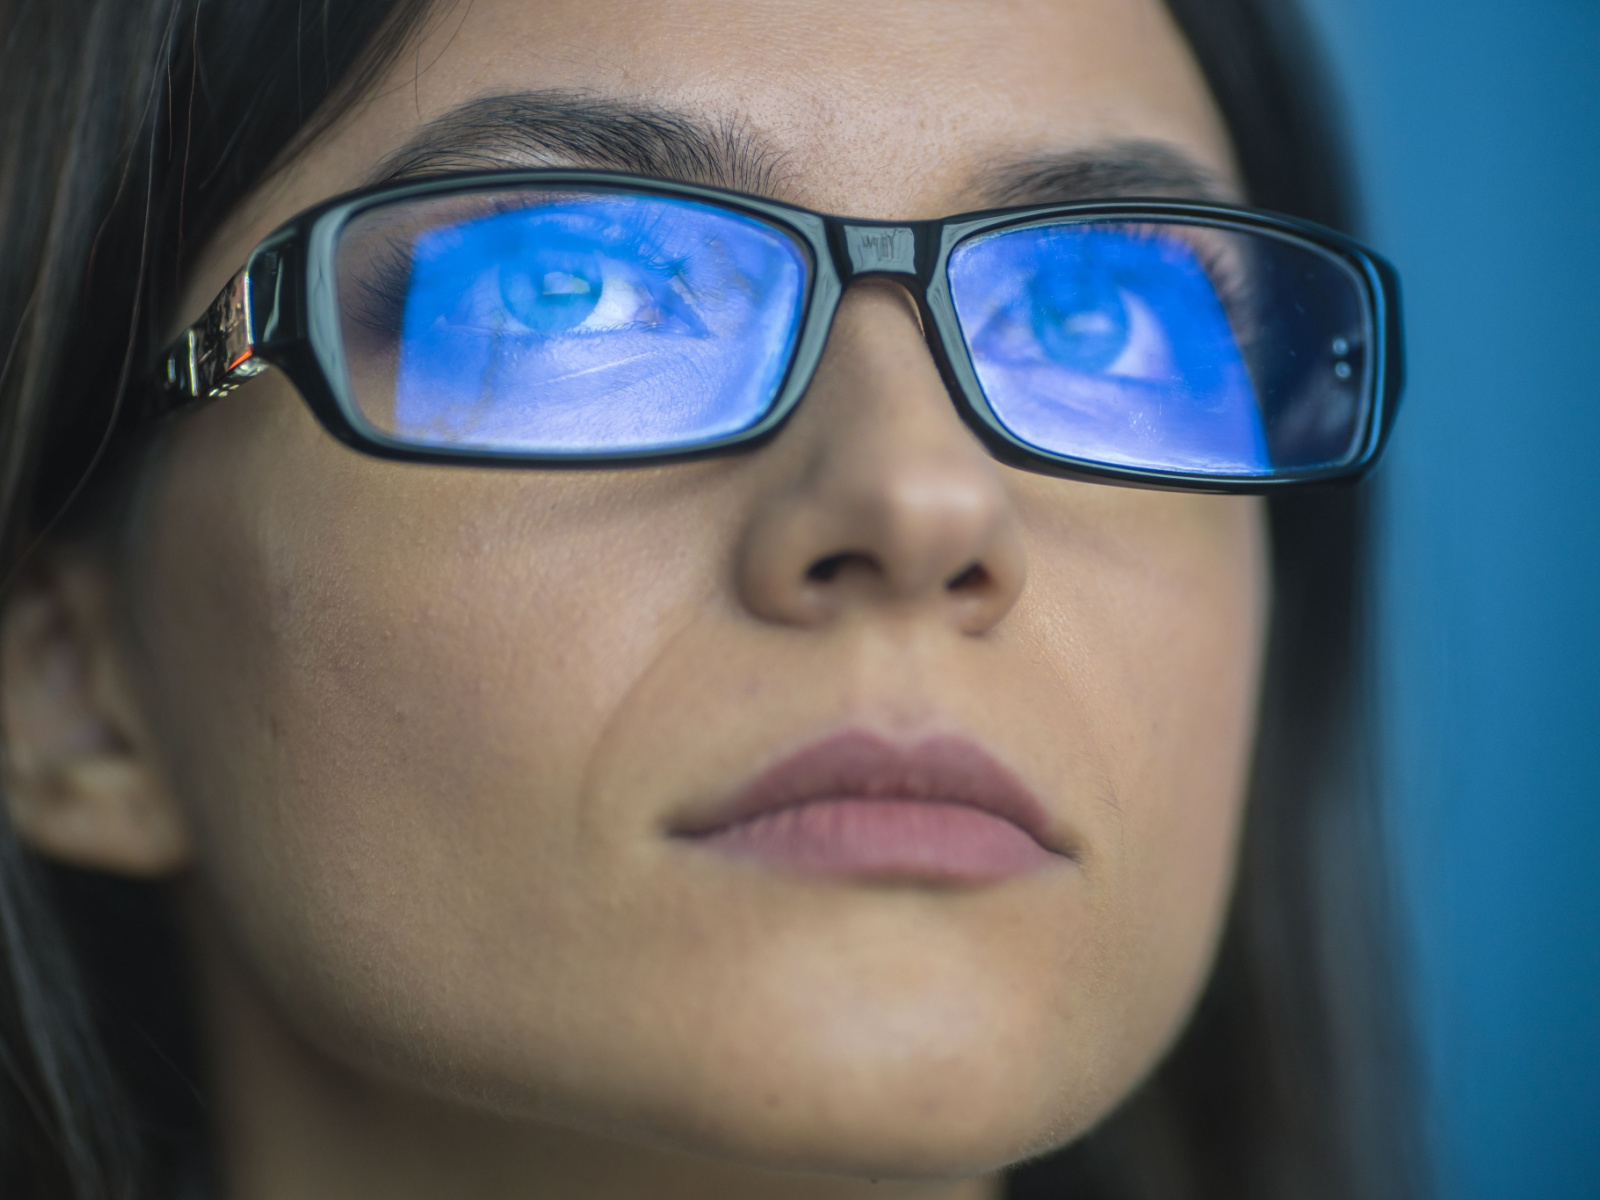 Photo of a woman's face with blue light reflecting off of her glasses.